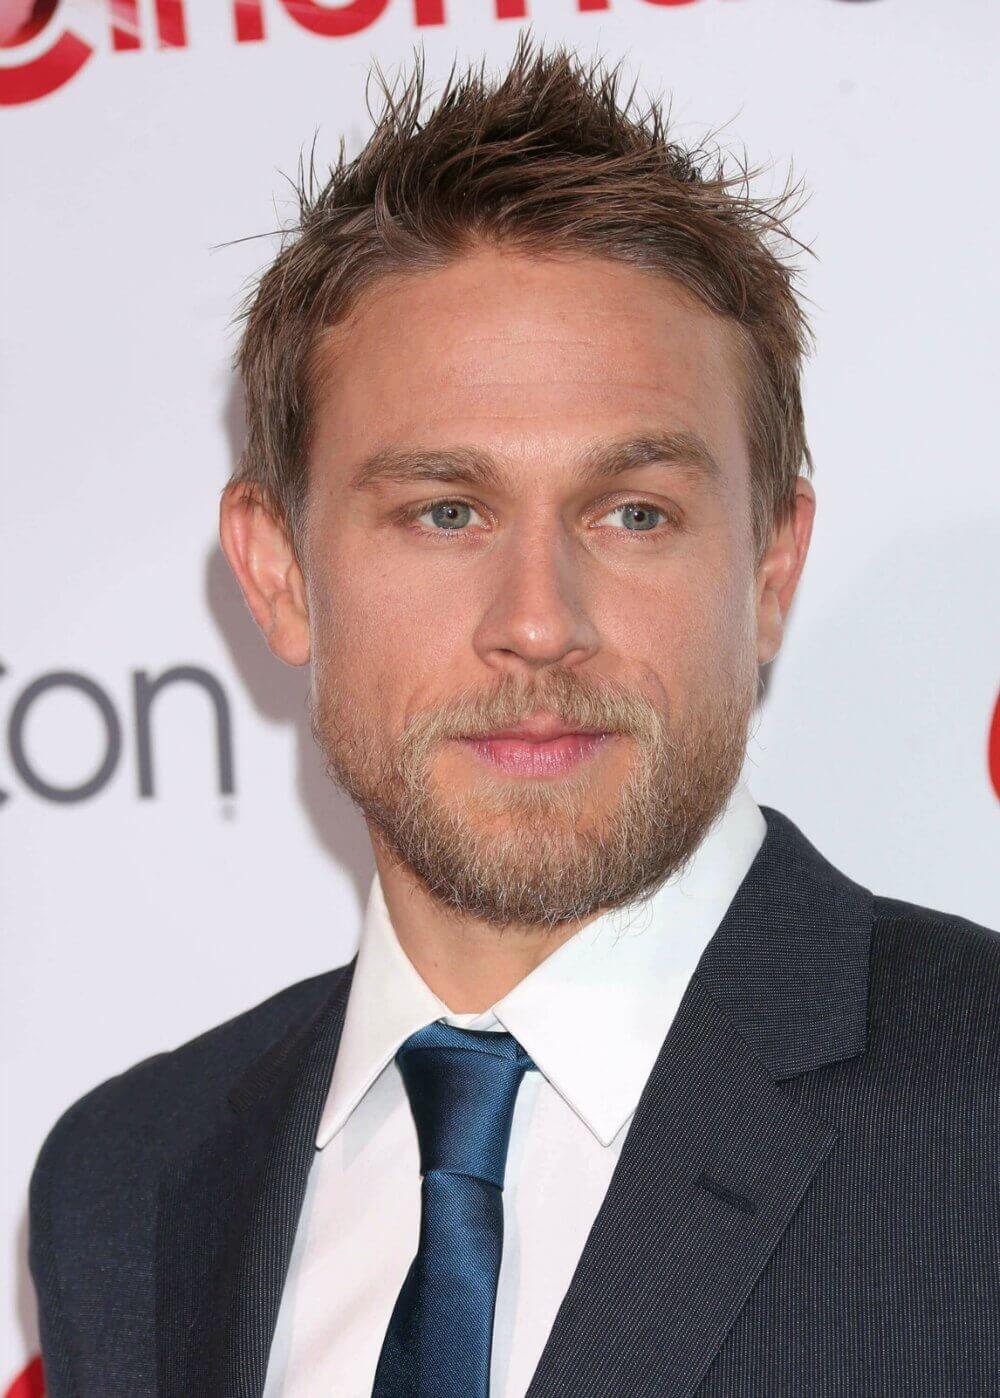 Charlie Hunnam Has a Soft Spot for Kittens—Hear the Story! image